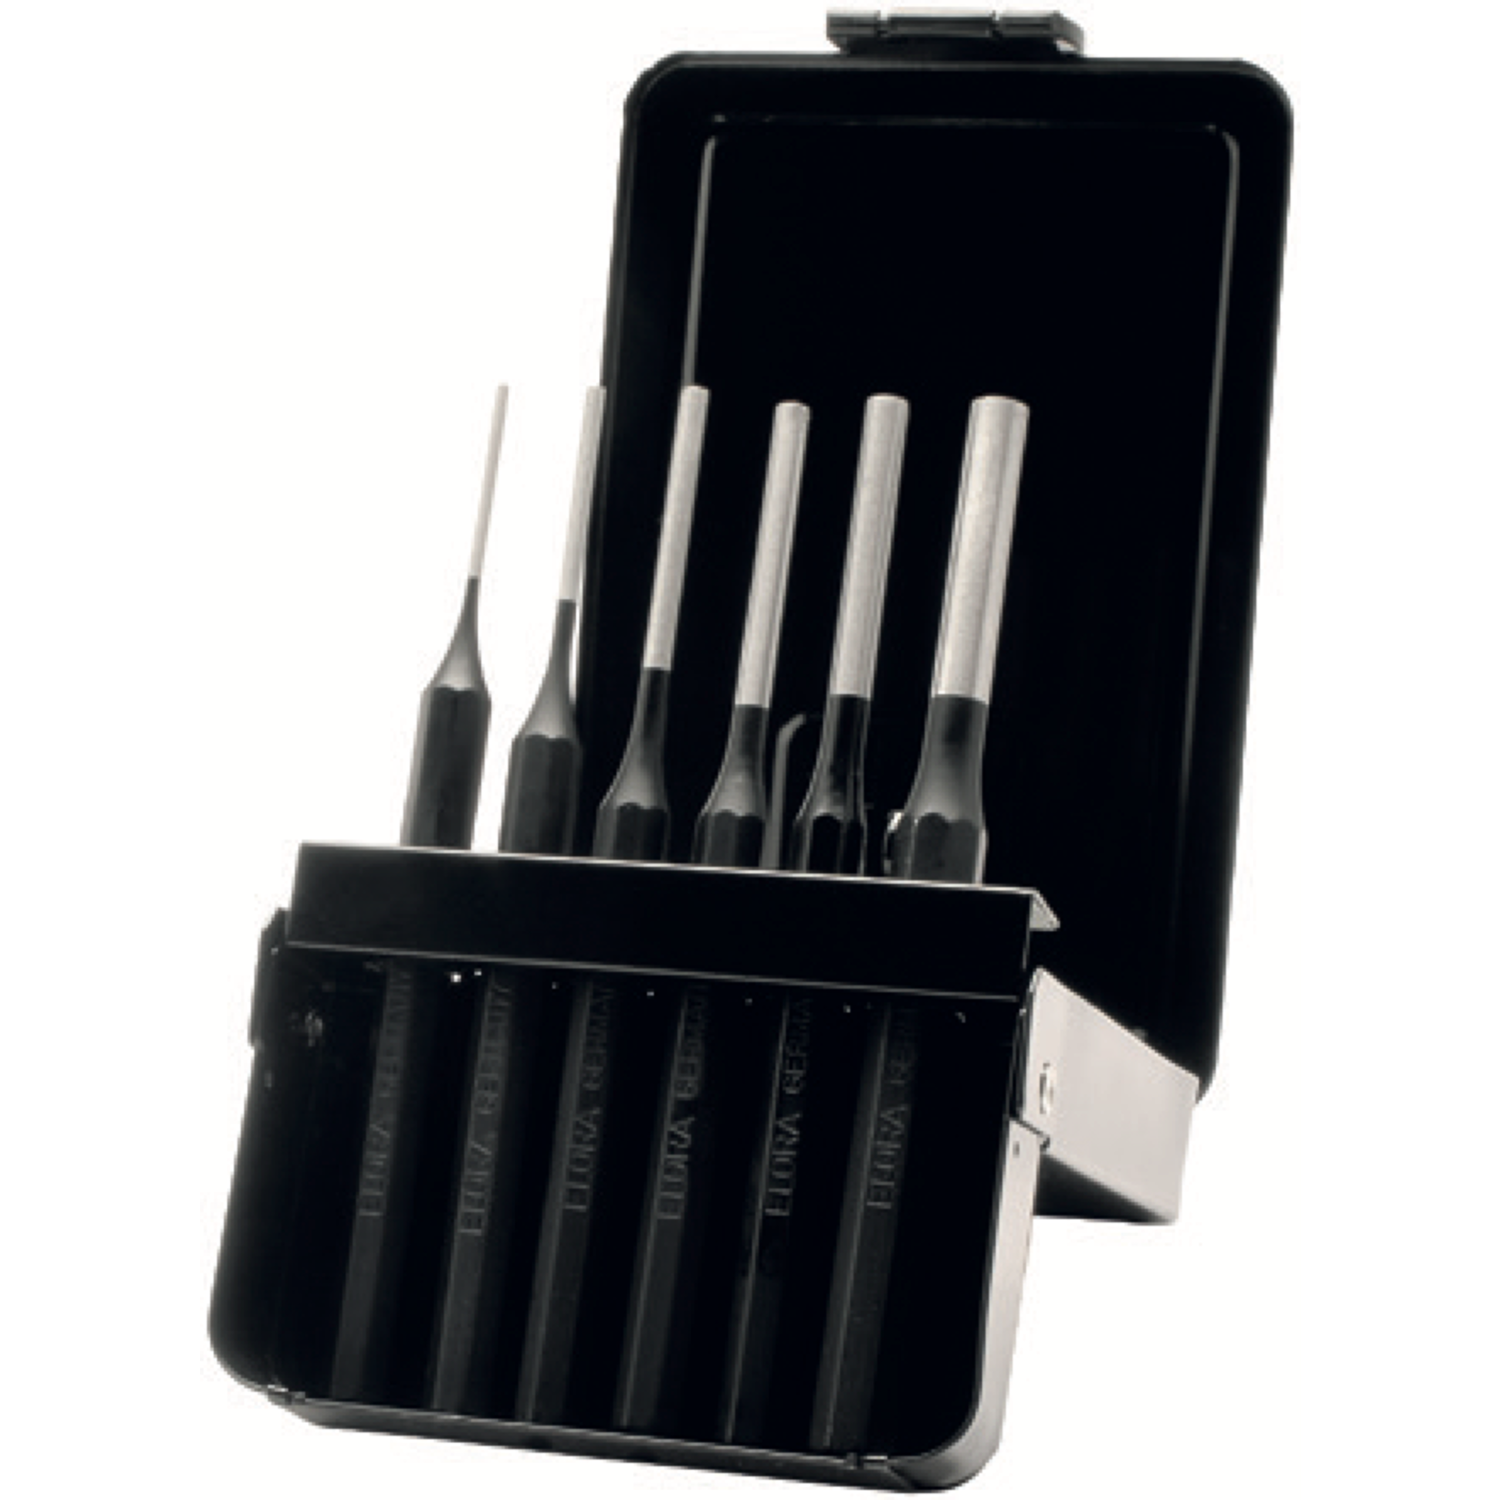 ELORA 271S Parallel Pin Punch Set In Wooden Holder (ELORA Tools) - Premium Pin Punch from ELORA - Shop now at Yew Aik.